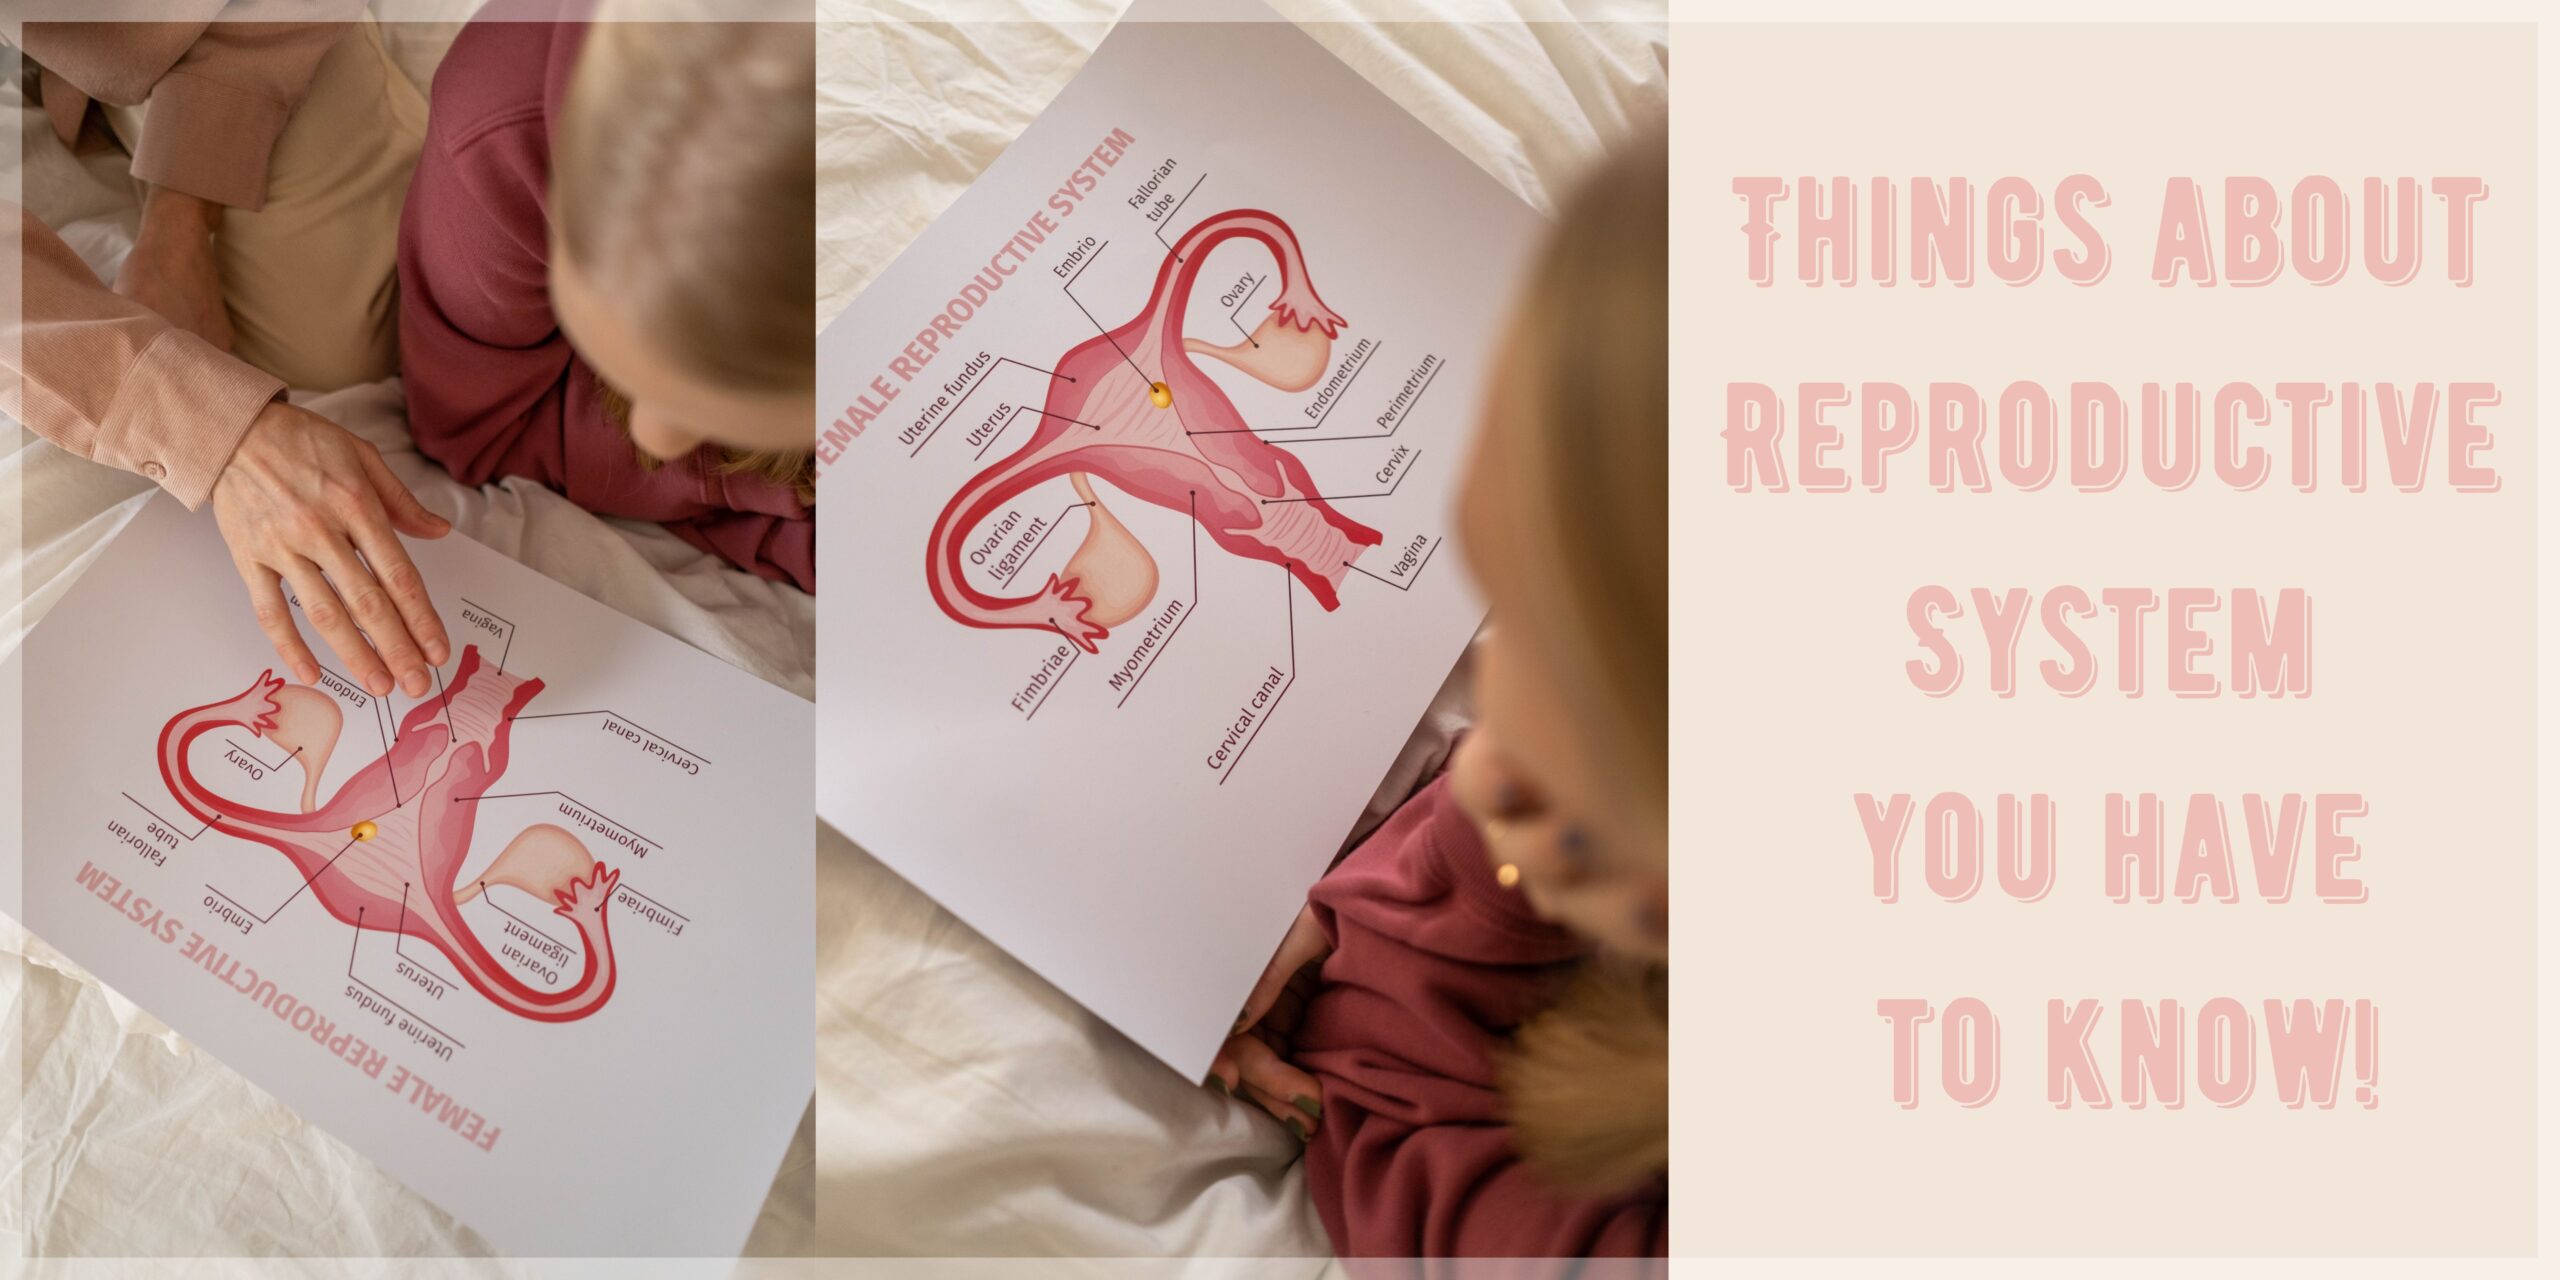 Things about Reproductive System you have to know!